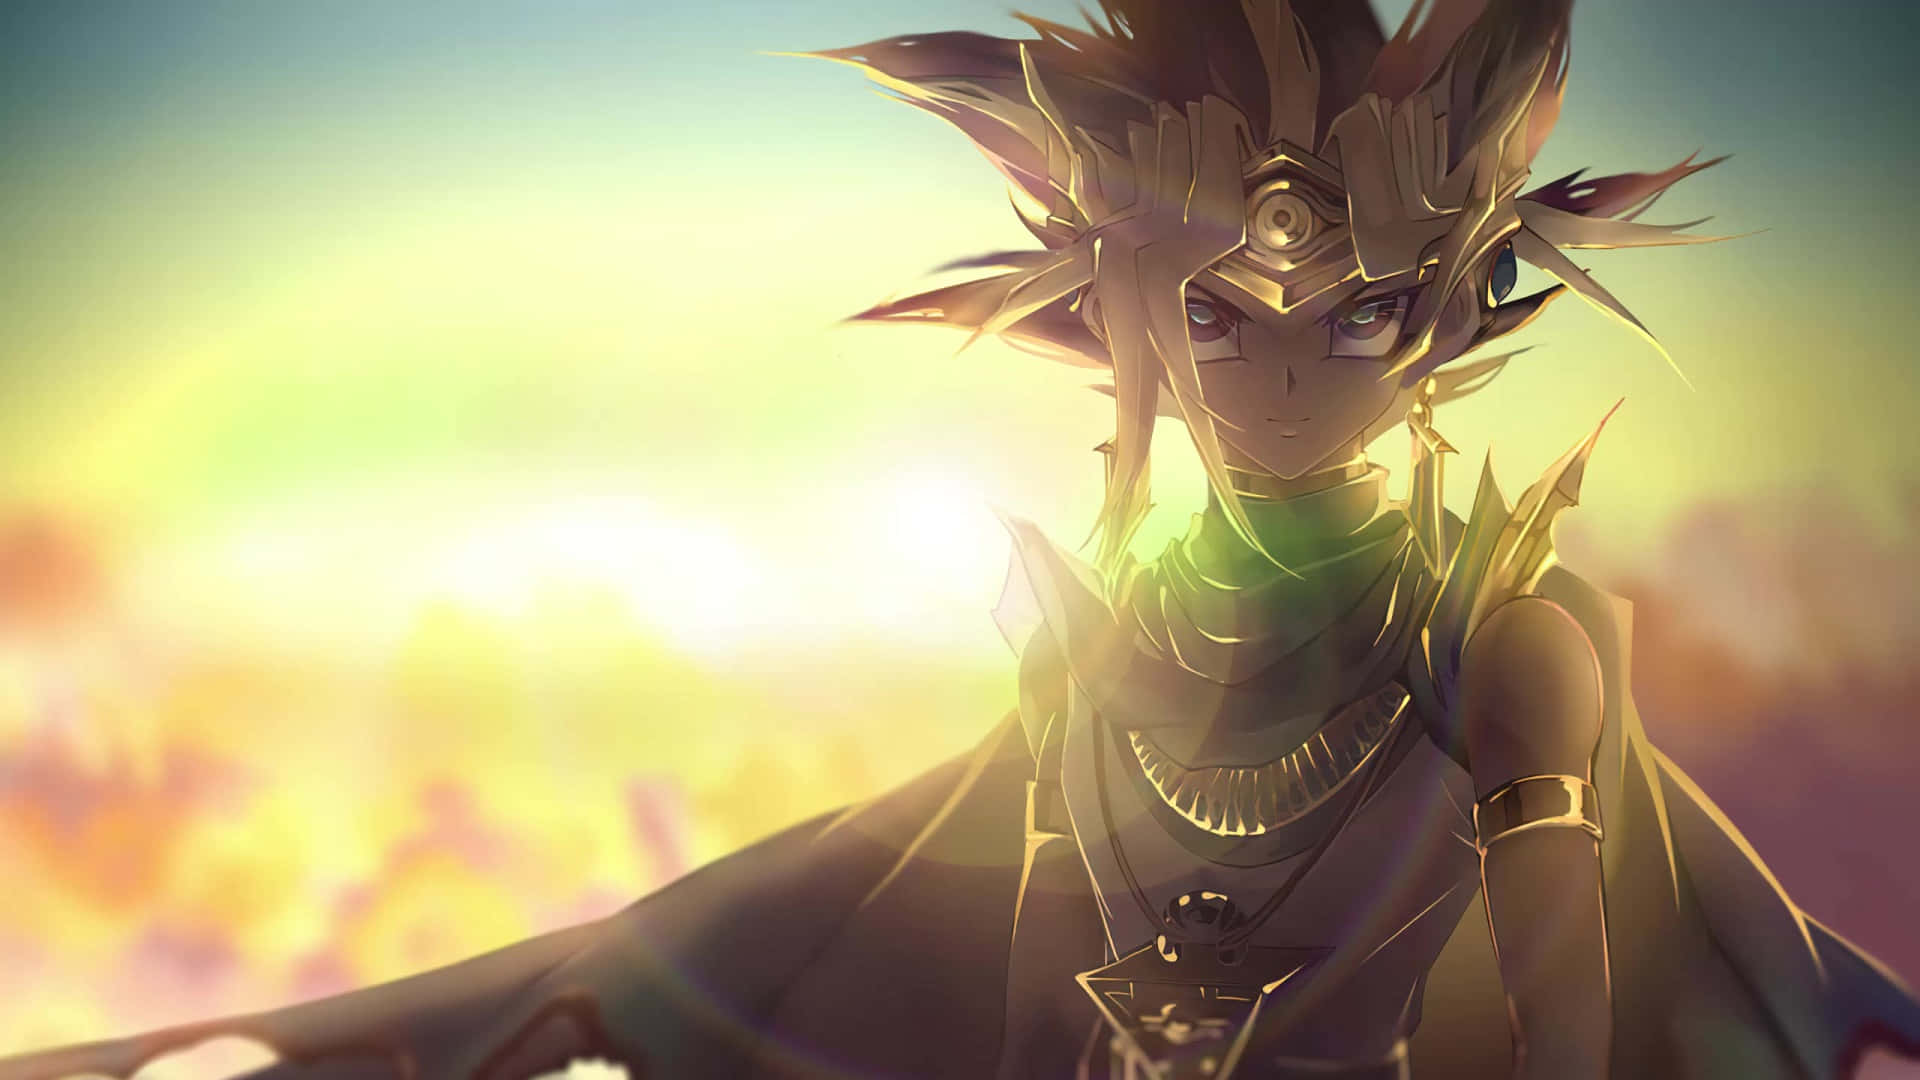 Pharaoh Atem standing tall against a dark and majestic backdrop Wallpaper